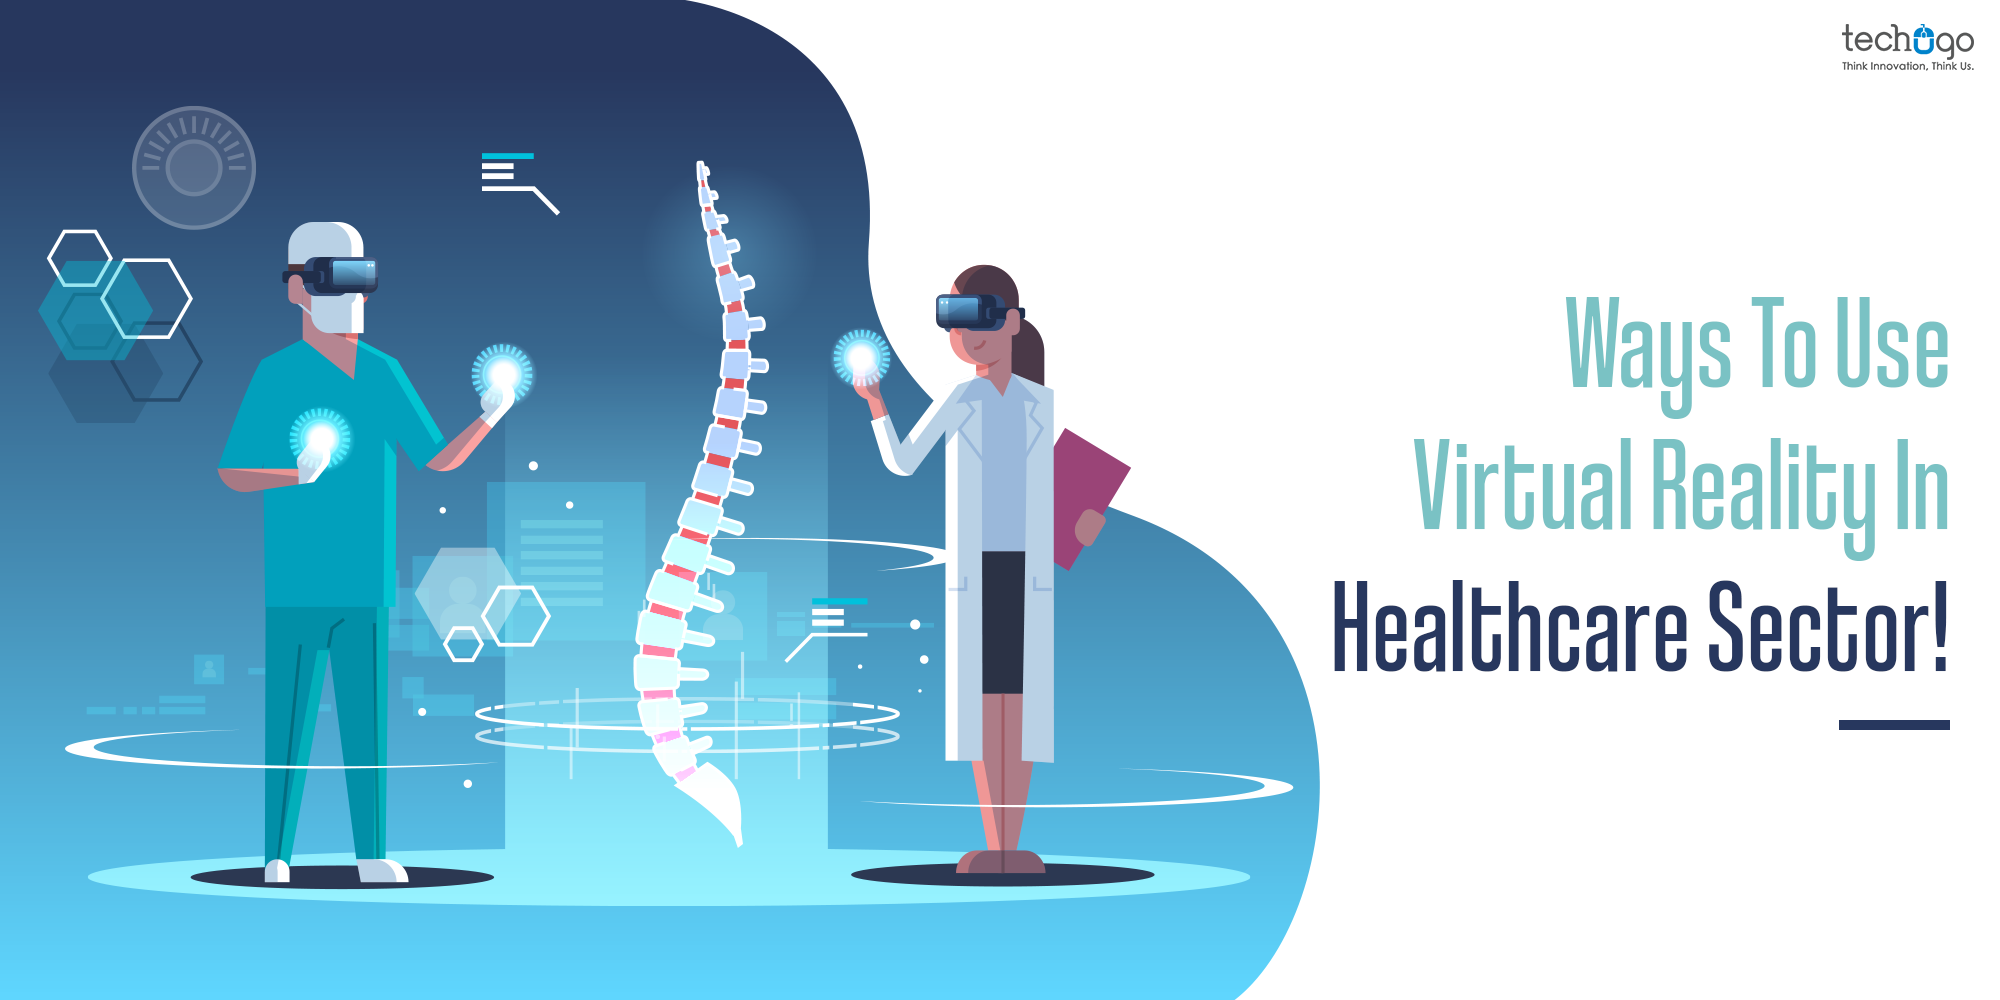 virtual reality in healthcare sector